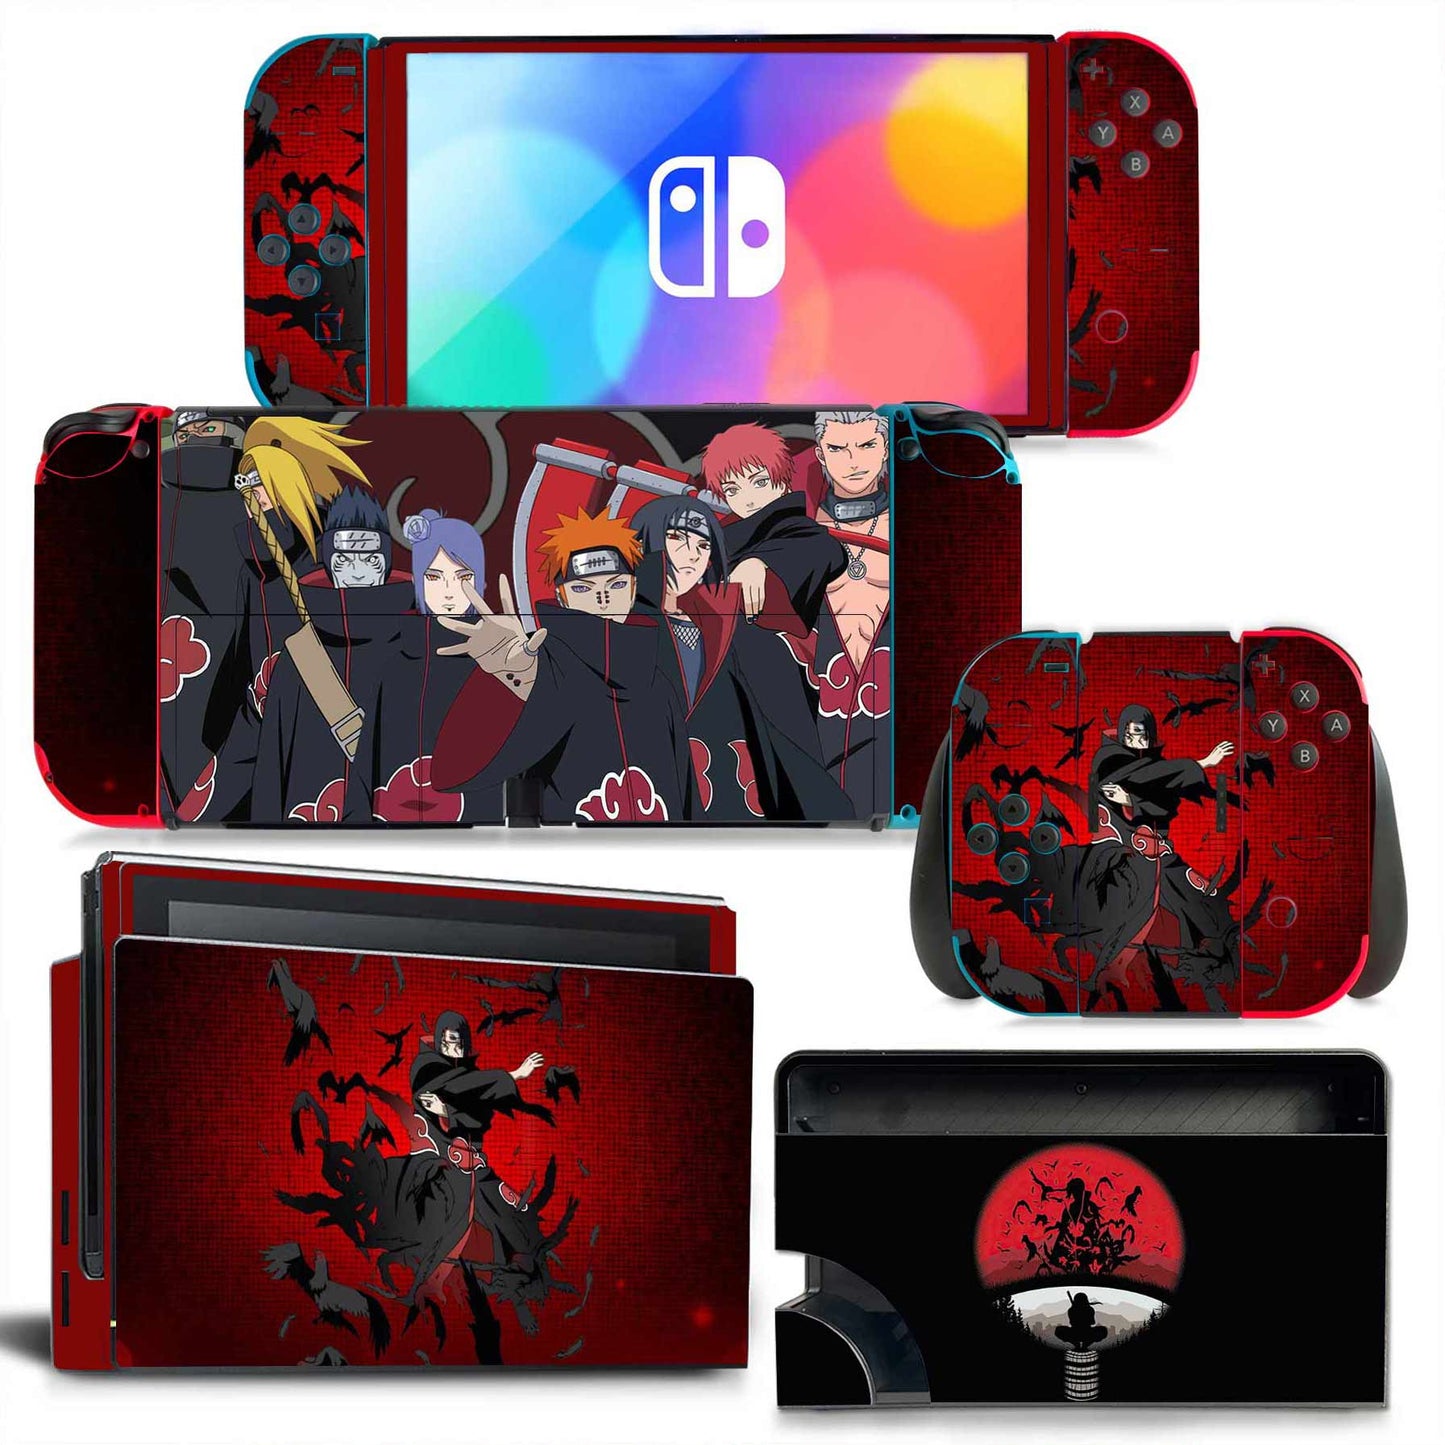 Anime Nintendo Switch Sticker Protective Cover 23